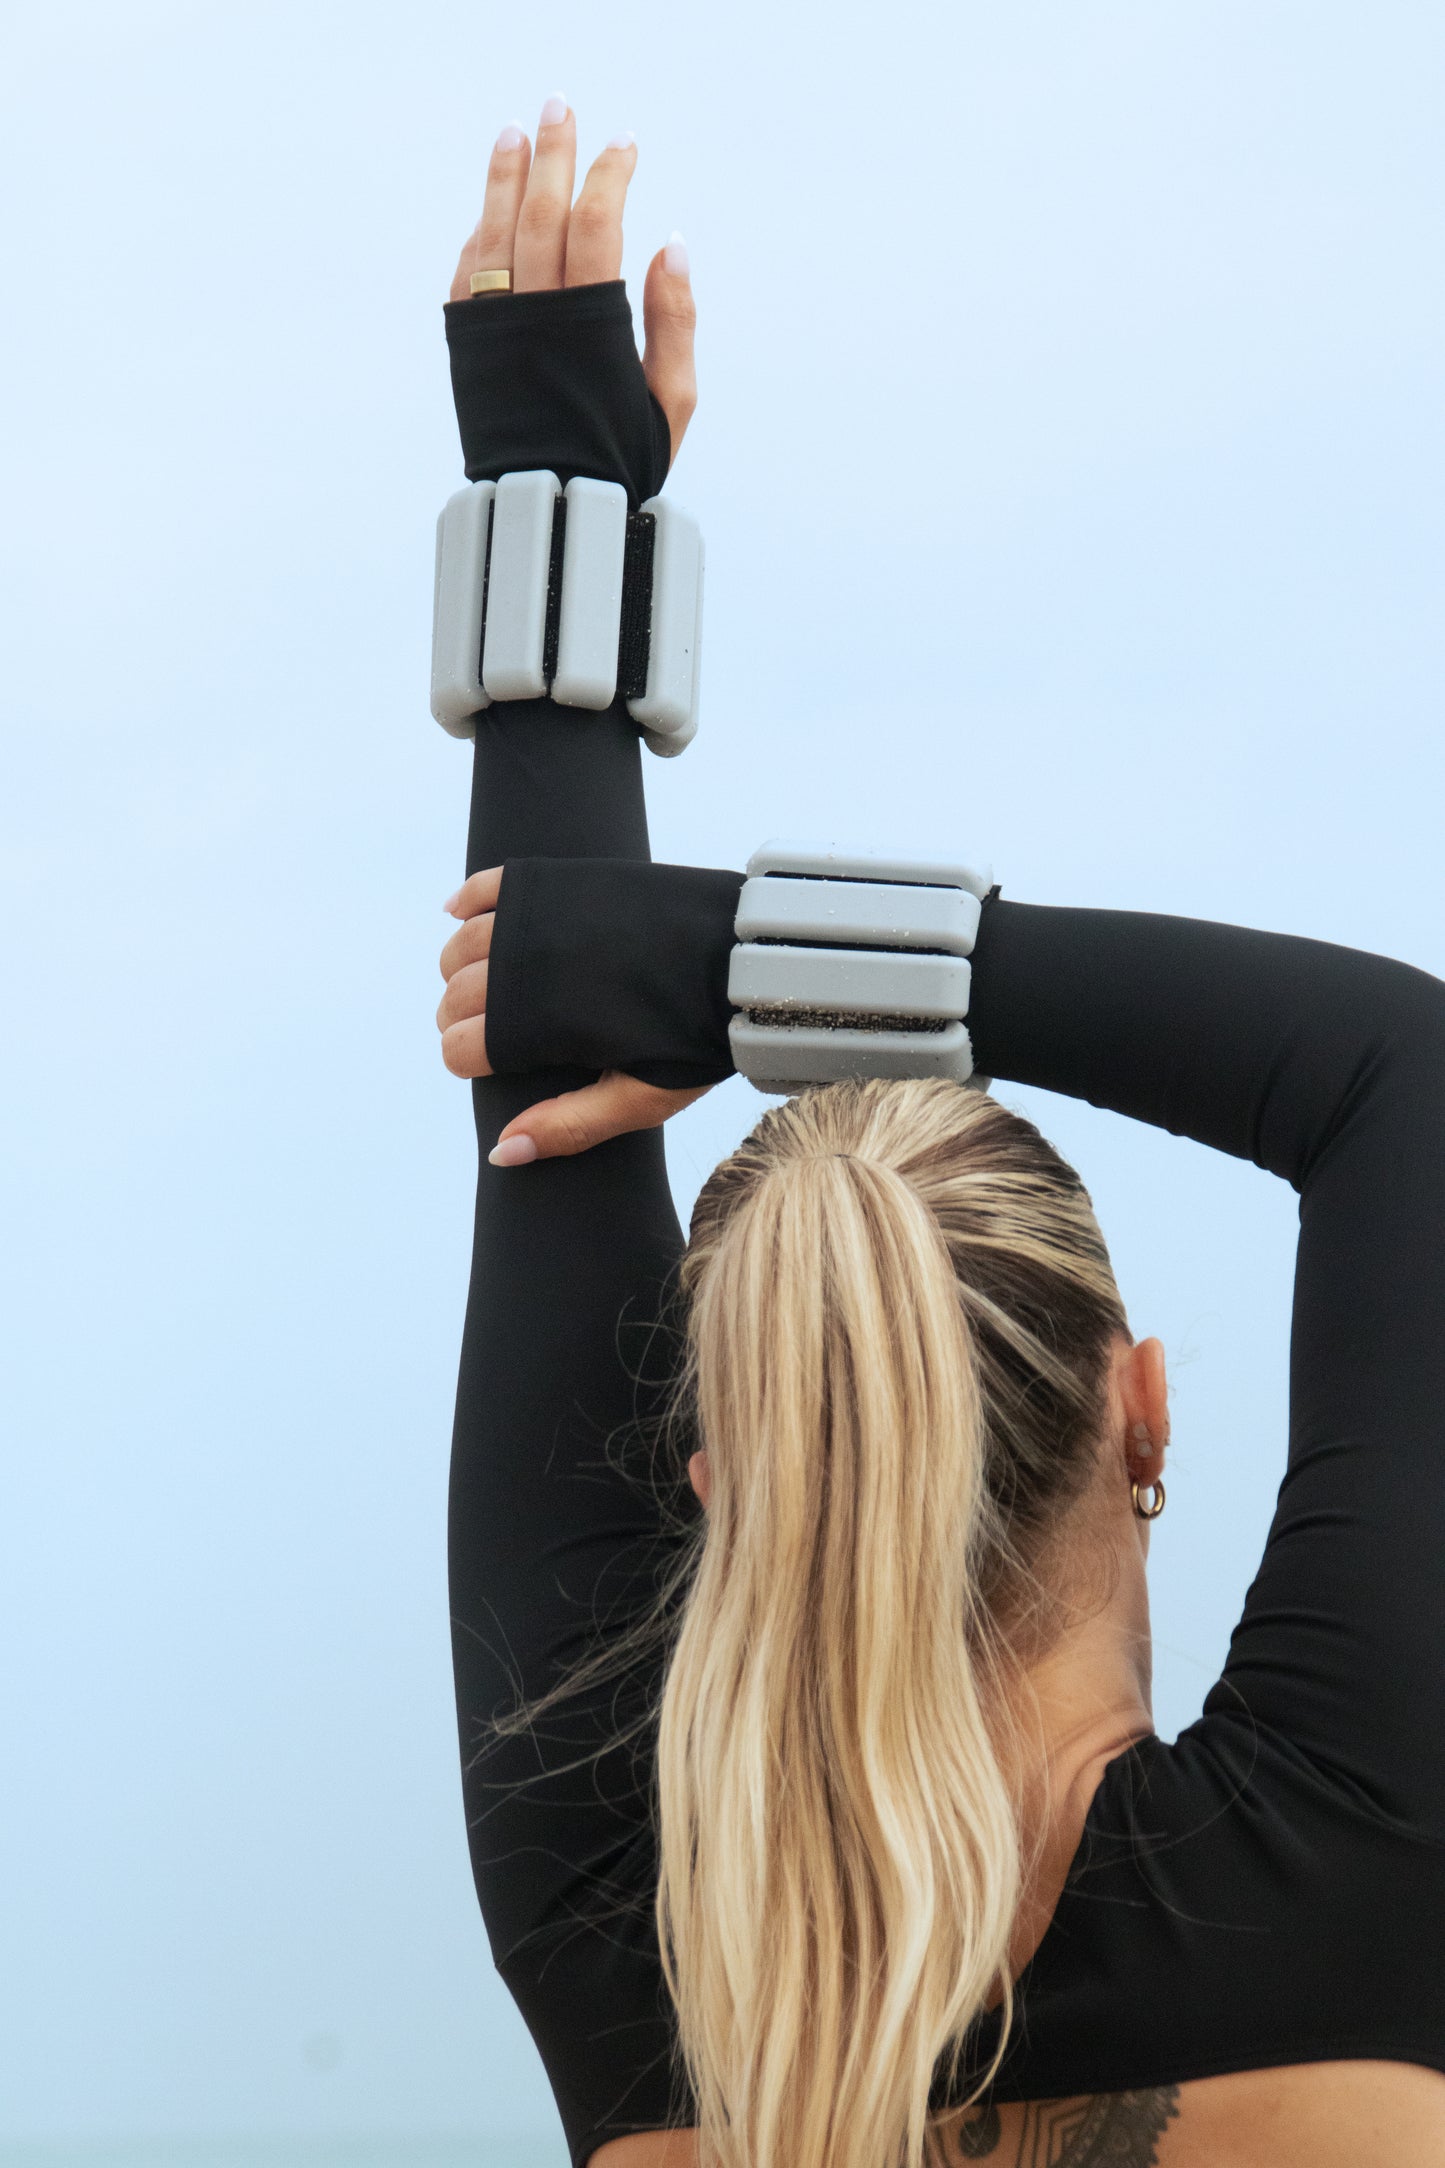 Fitness enthusiast performing a stretch with Curvd wrist weights against a serene sky backdrop.